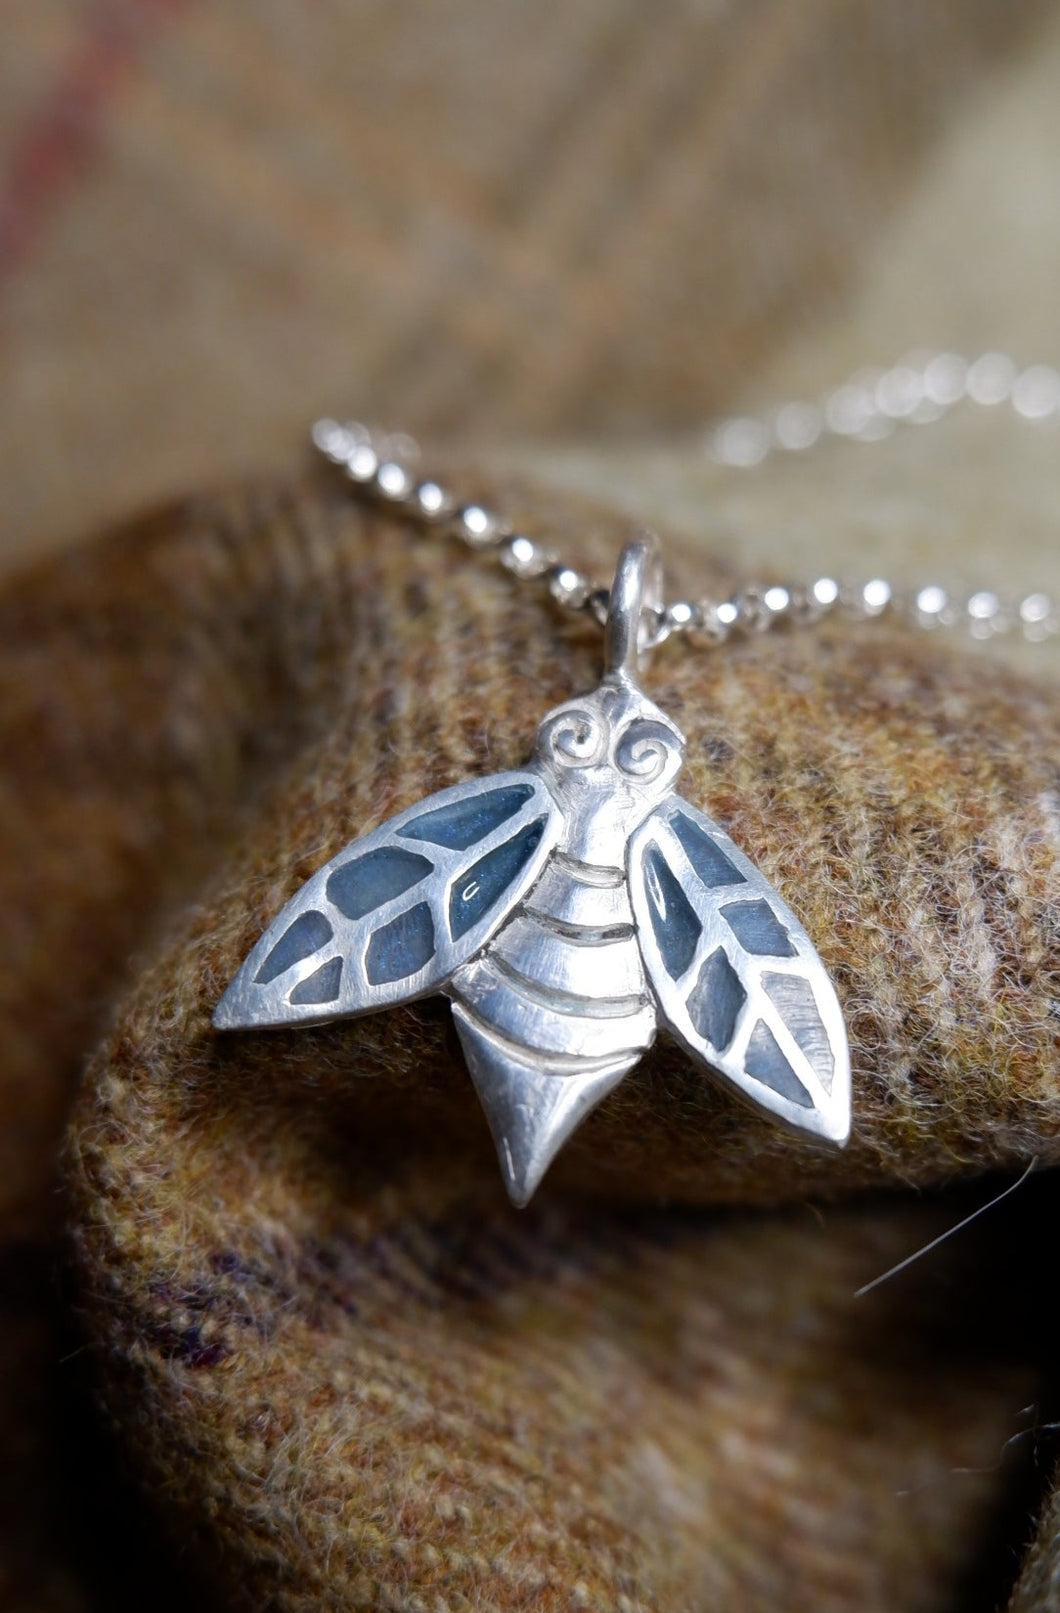 Pictish Bee Pendant with See Through enamel Wings